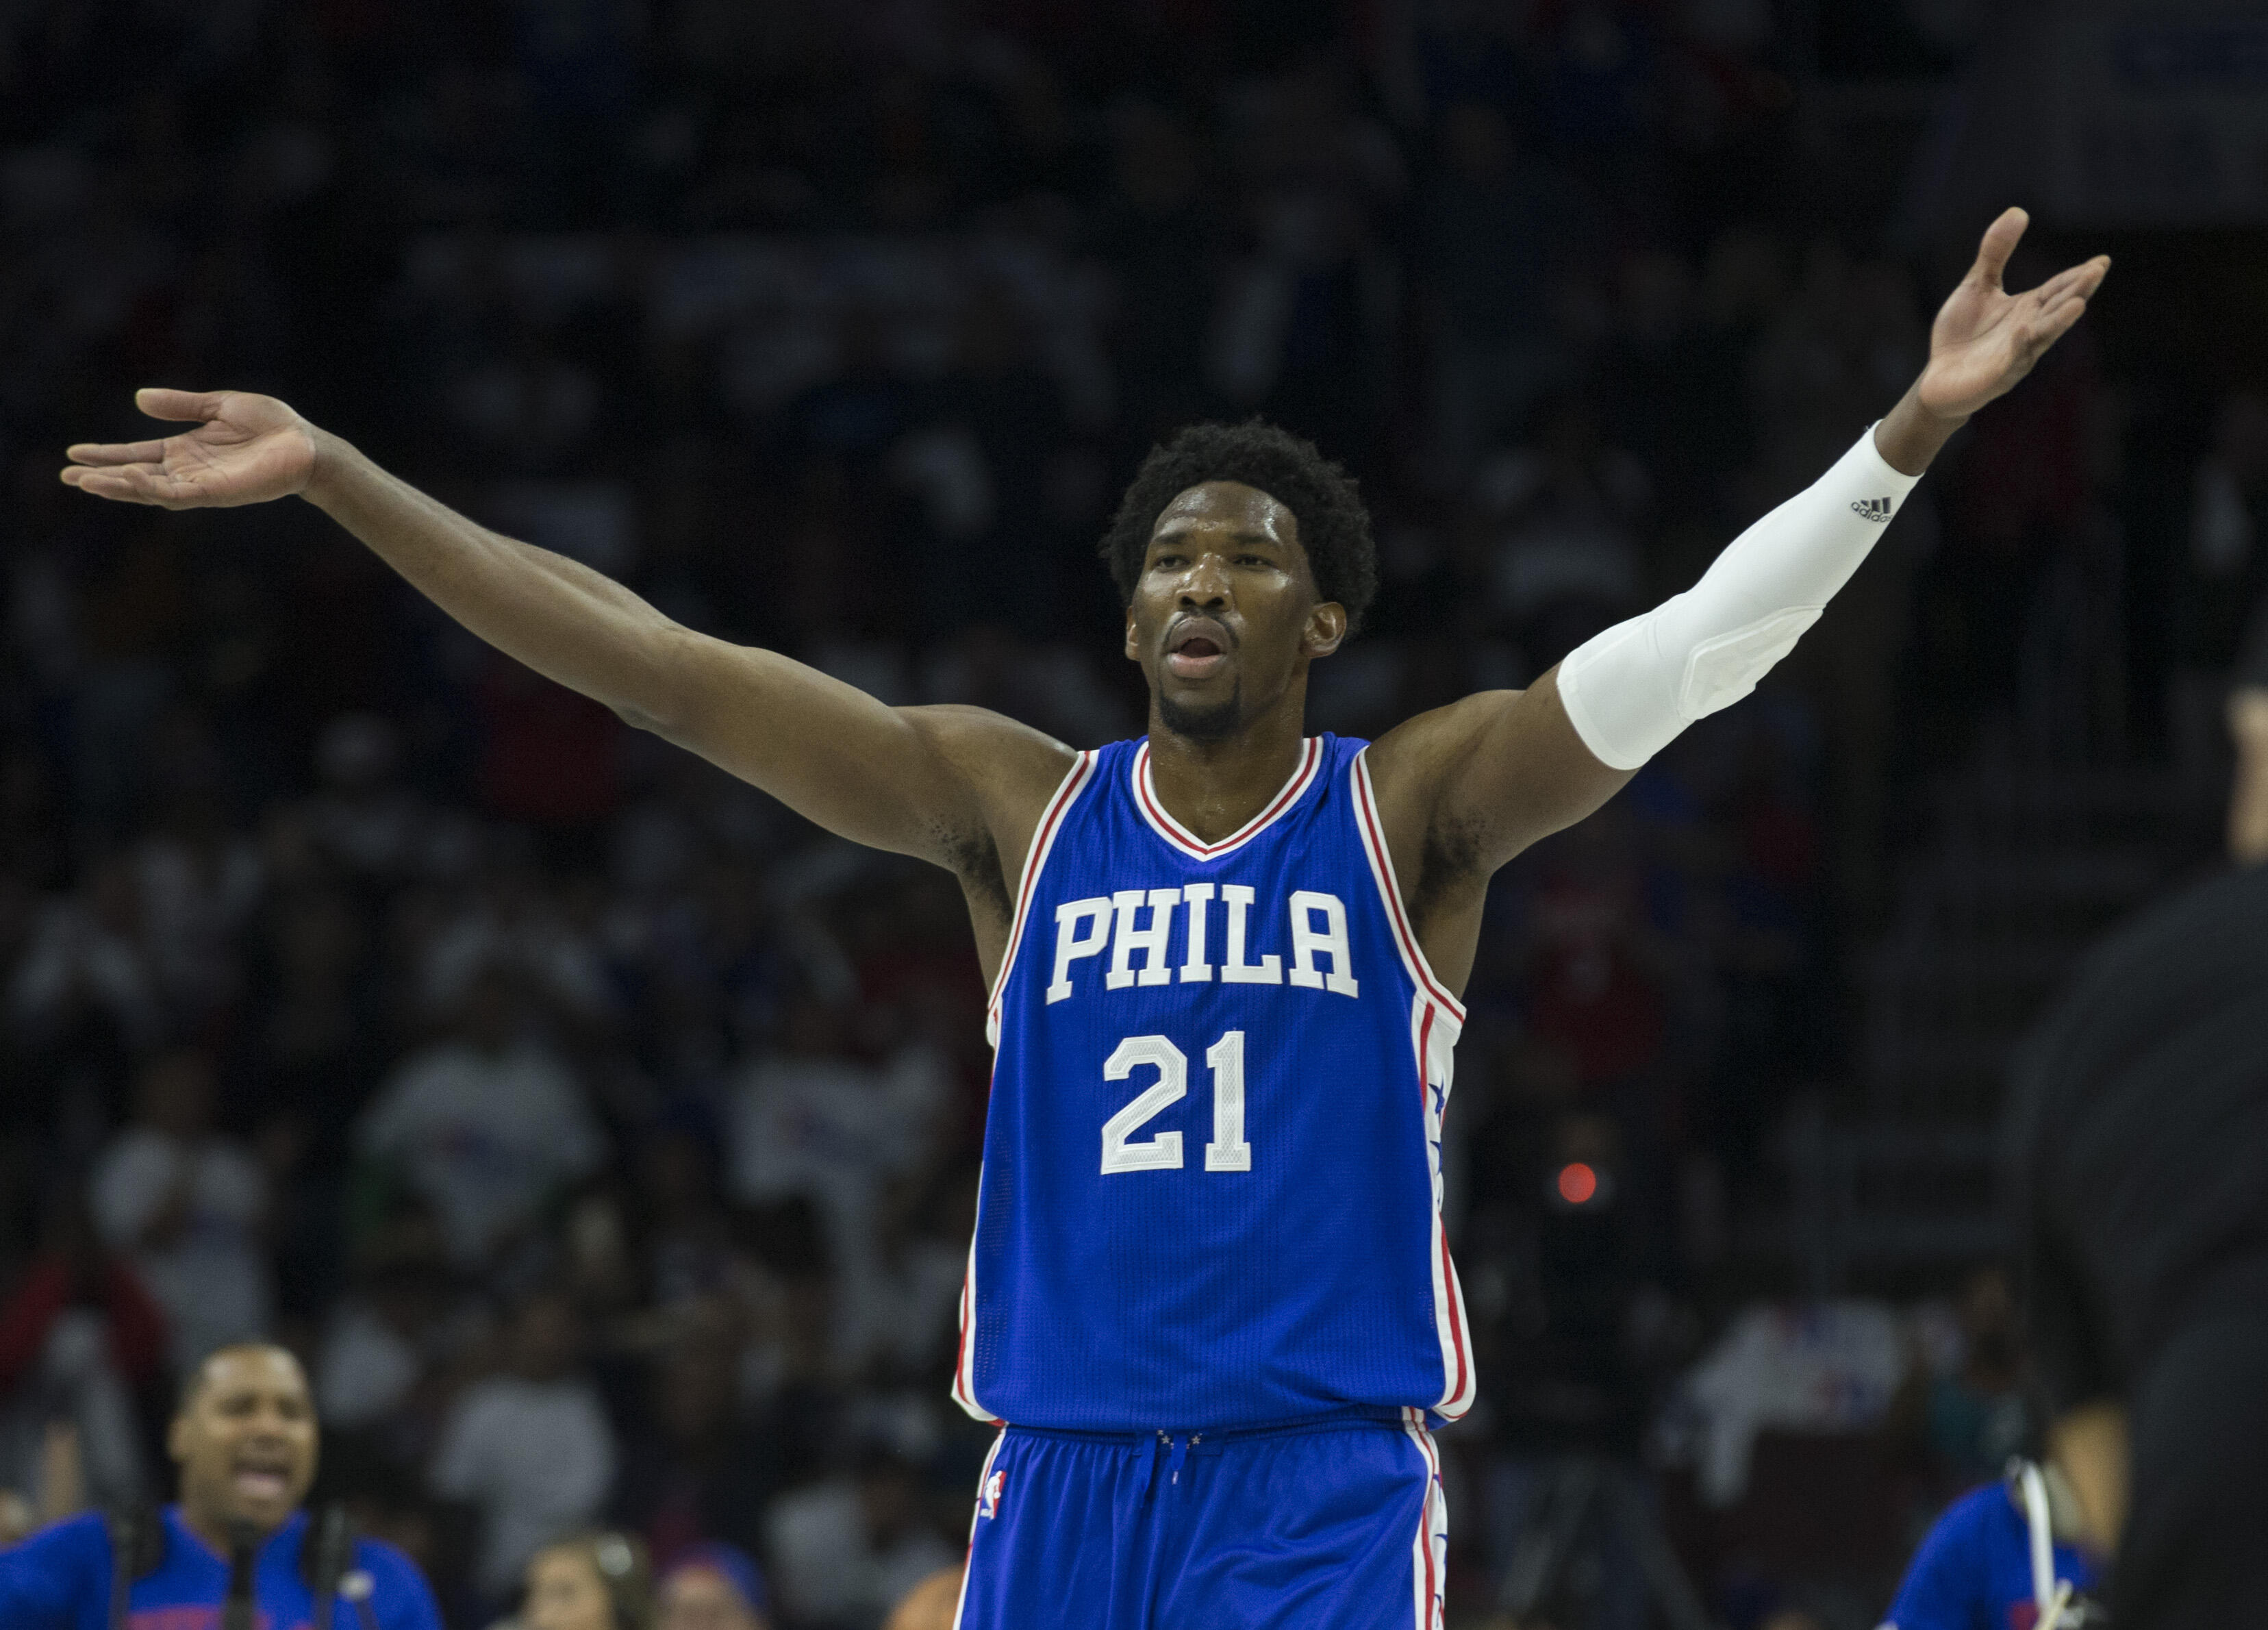 PHILADELPHIA, PA - OCTOBER 26: Joel Embiid #21 of the Philadelphia 76ers reacts against the Oklahoma City Thunder at Wells Fargo Center on October 26, 2016 in Philadelphia, Pennsylvania. NOTE TO USER: User expressly acknowledges and agrees that, by downlo